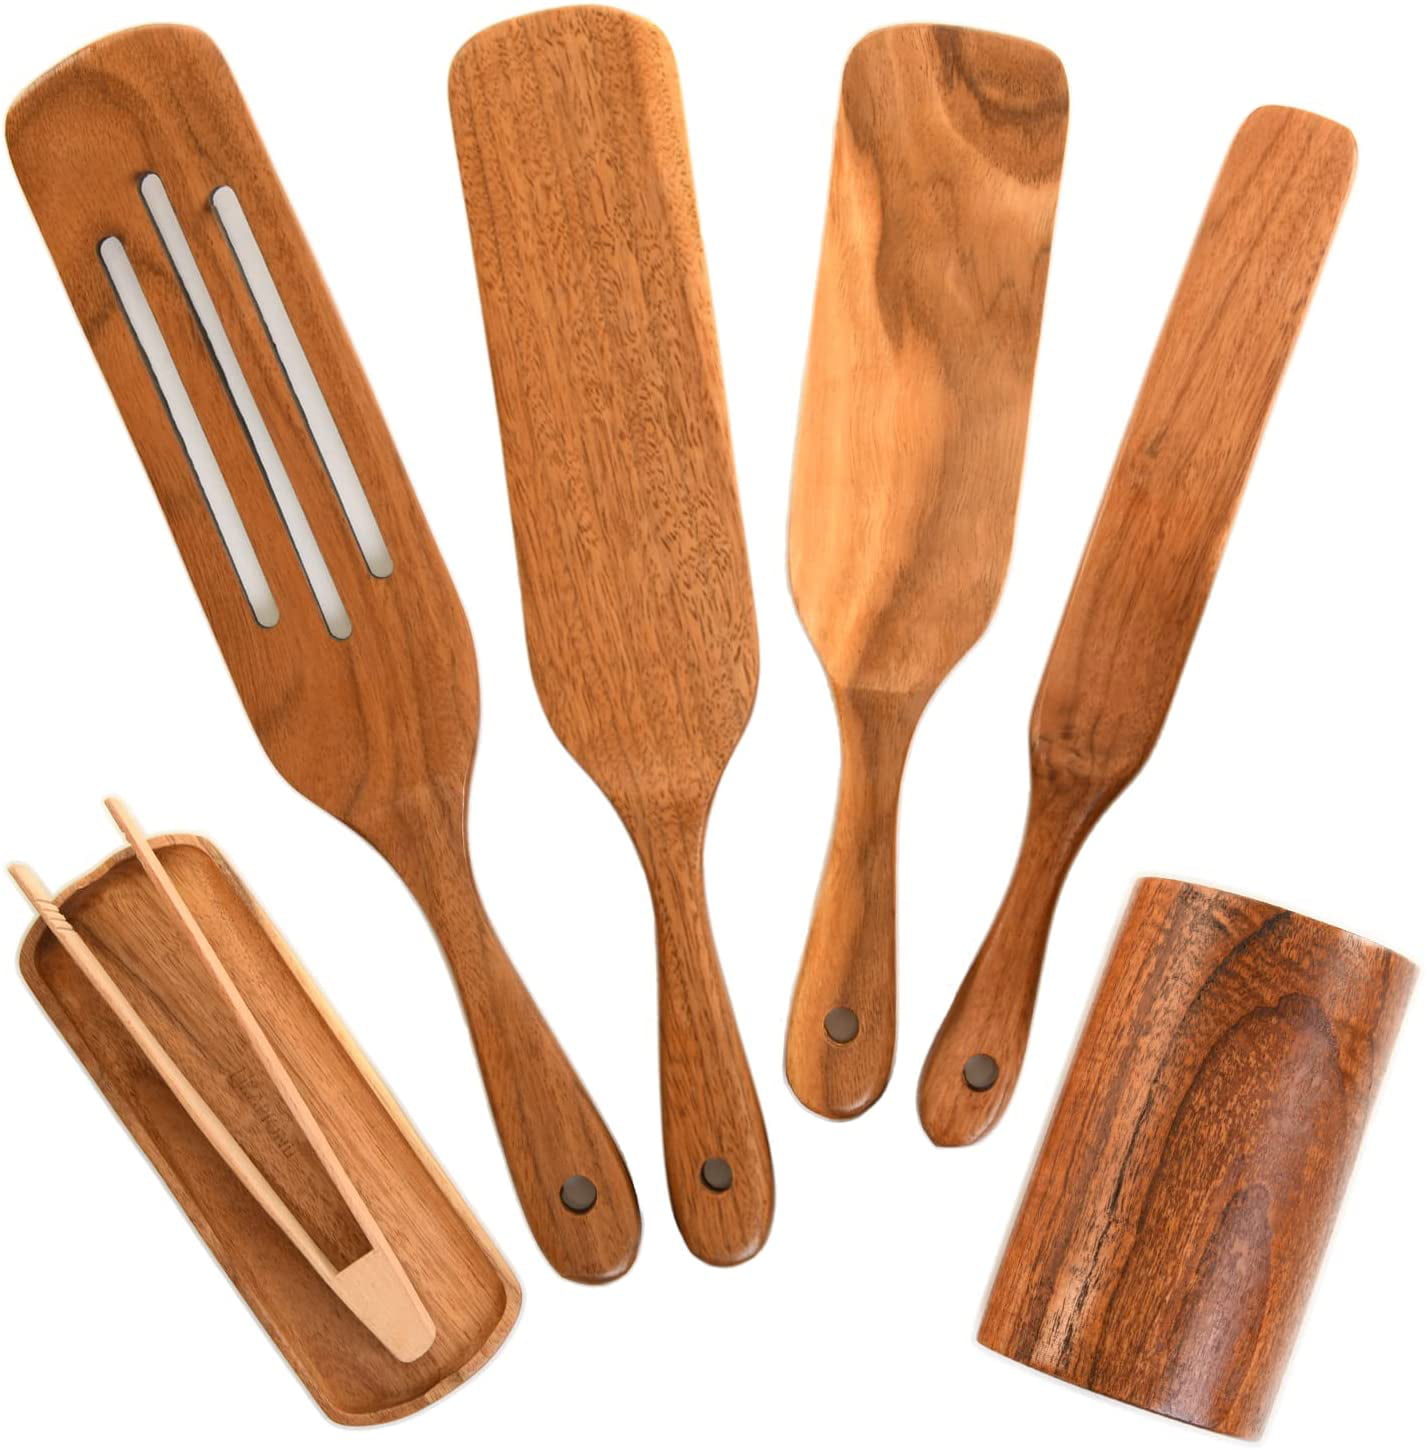 Serving and More Wooden Spurtle Spatula Set-7Pcs Stirring Wood Spoons for Cooking Mixing Teak Spurtles Kitchen Tools As Seen on TV Wooden Cooking Kitchen Utensil Set for Scooping 